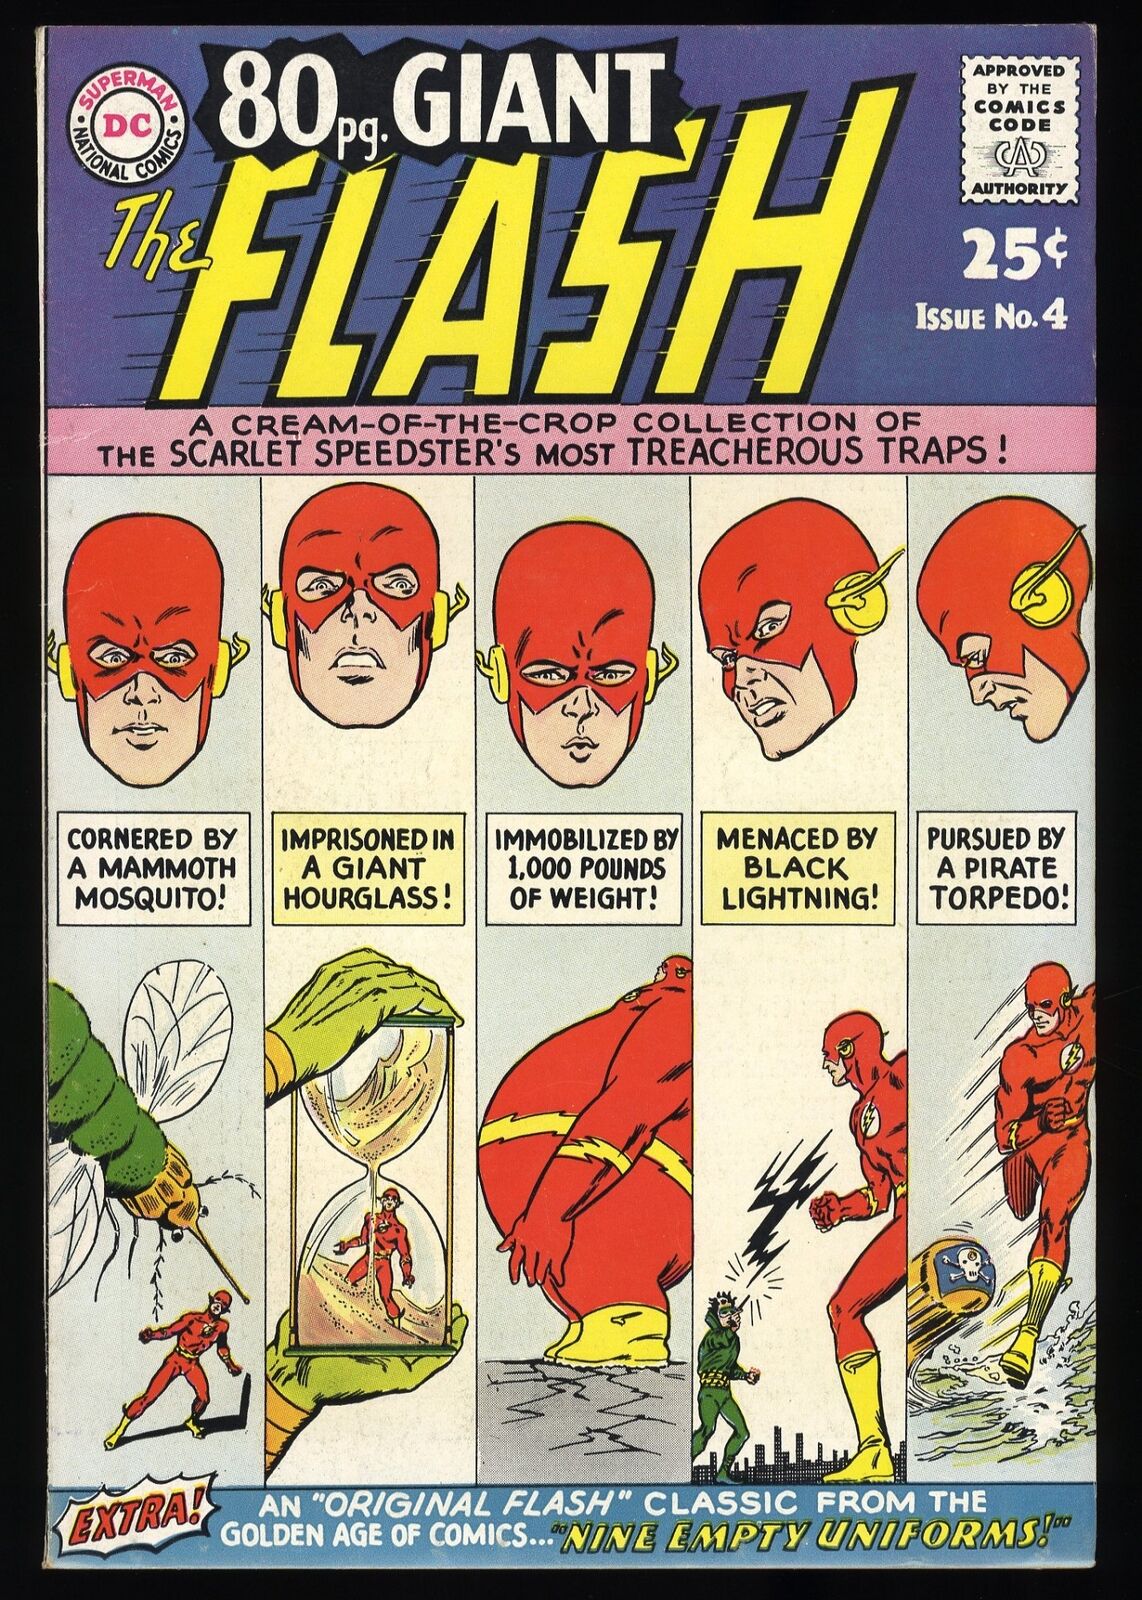 80 Page Giant #4 VF+ 8.5 Flash Reprints Infantino/Anderson Cover Art